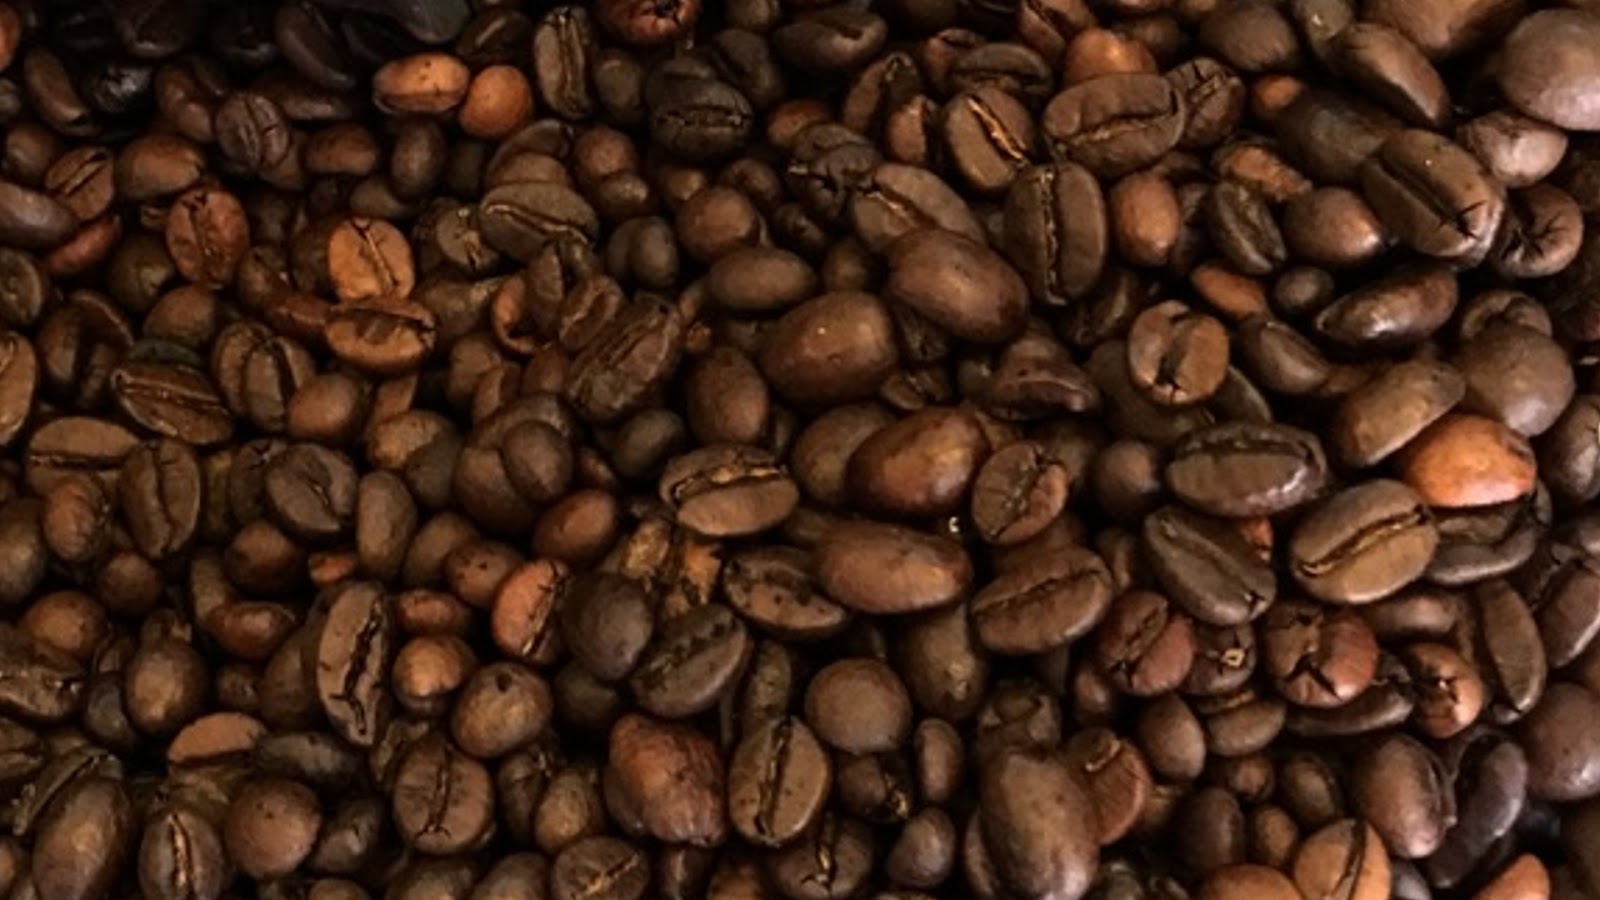  types of coffee beans